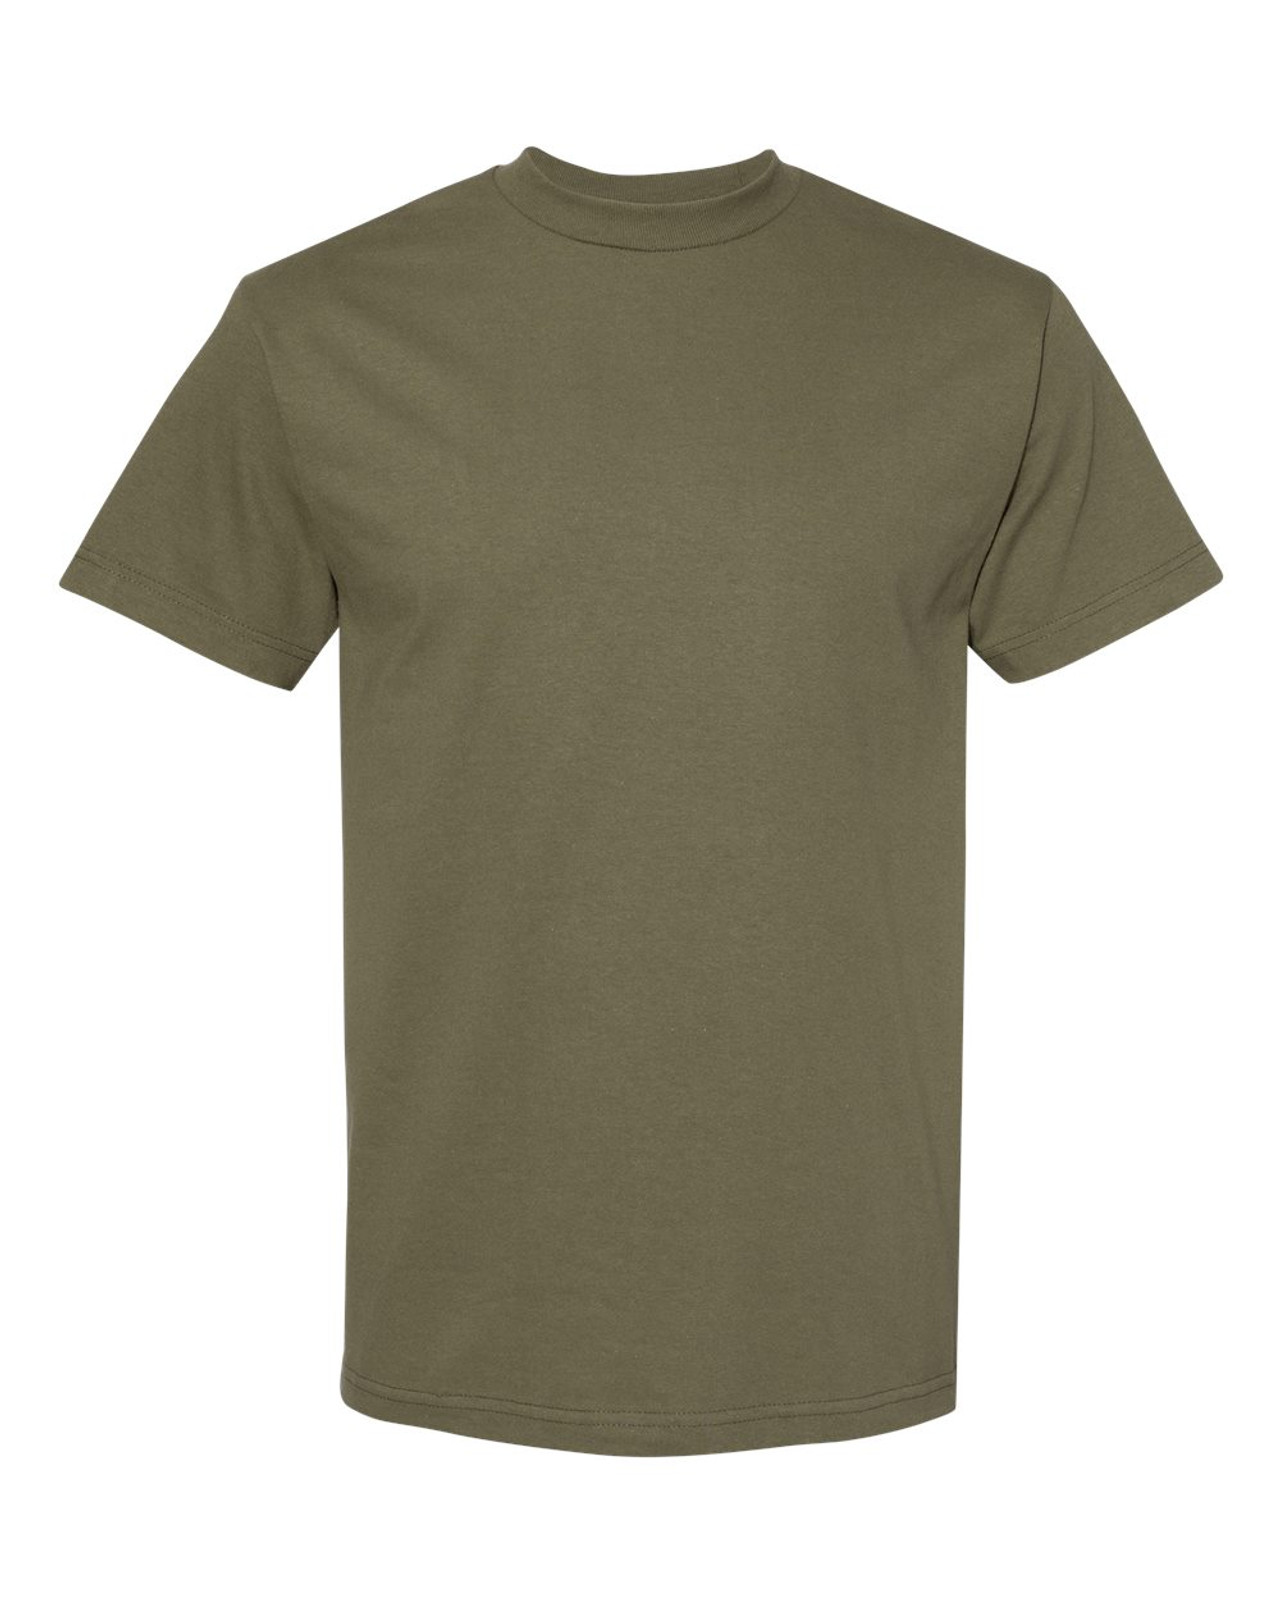 Blank T-Shirts & Apparel at Wholesale Prices | T-shirt.ca